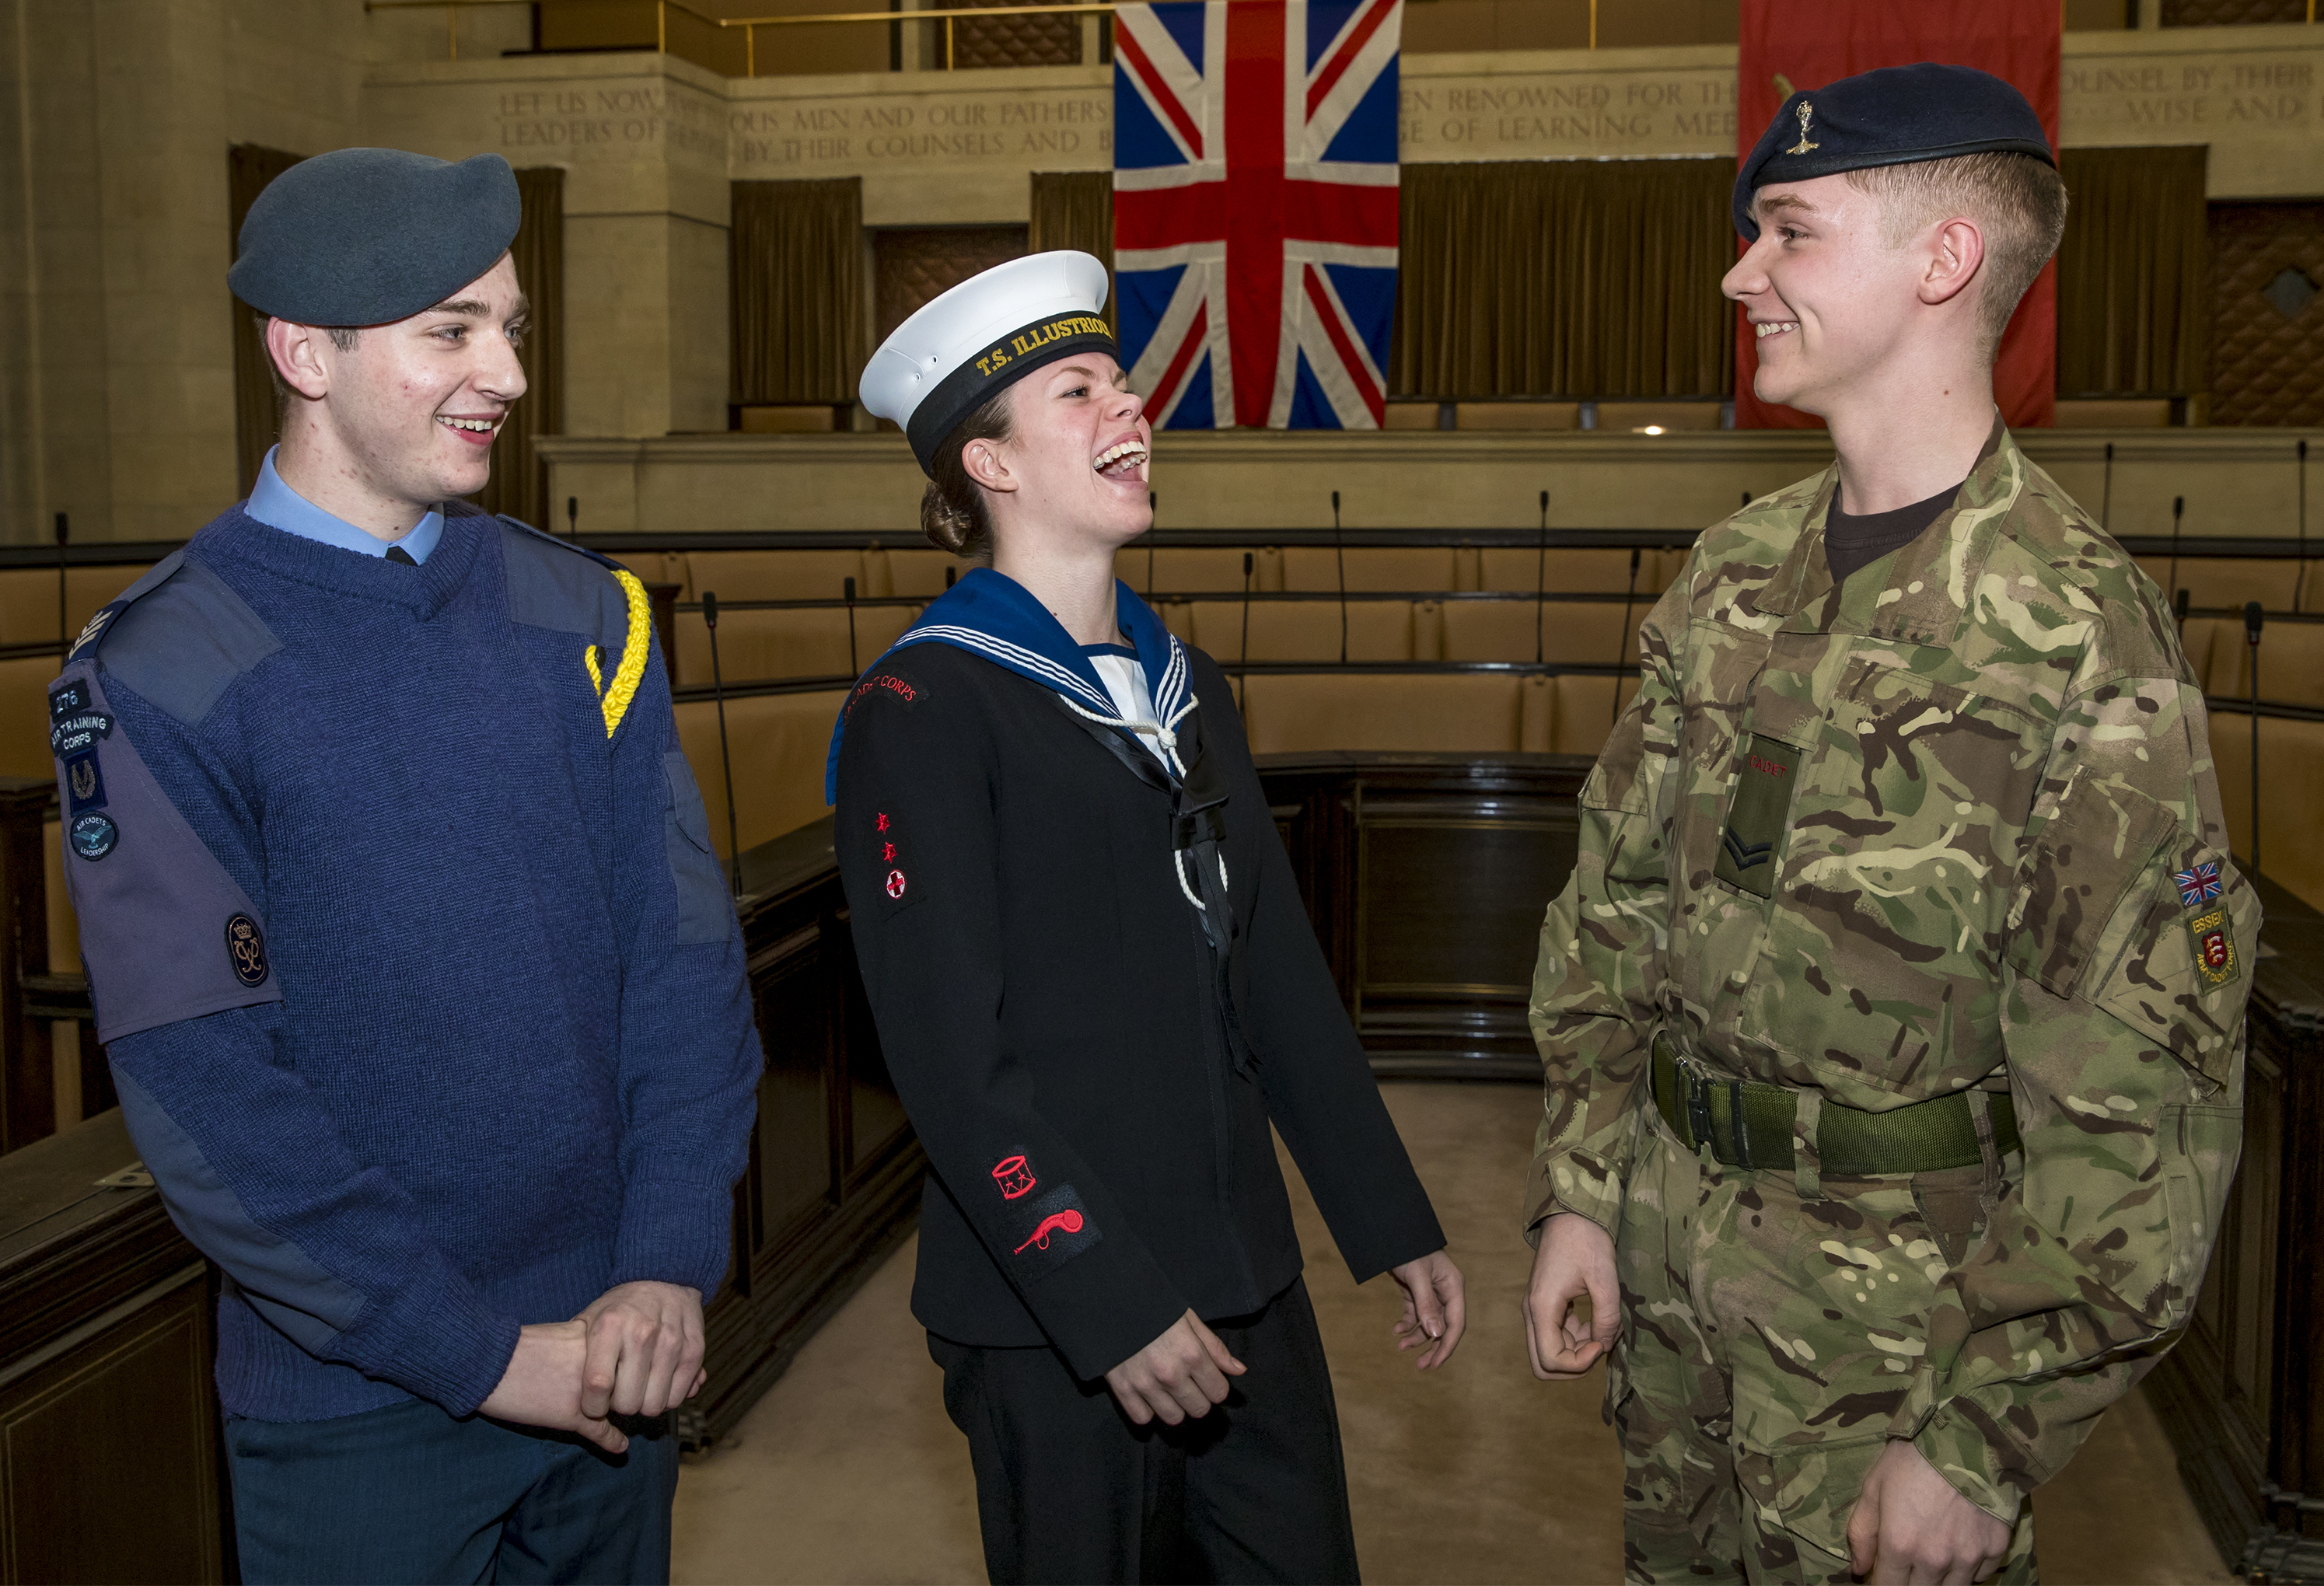 Swapping cadet stories in a RAFAC, SCC and ACF